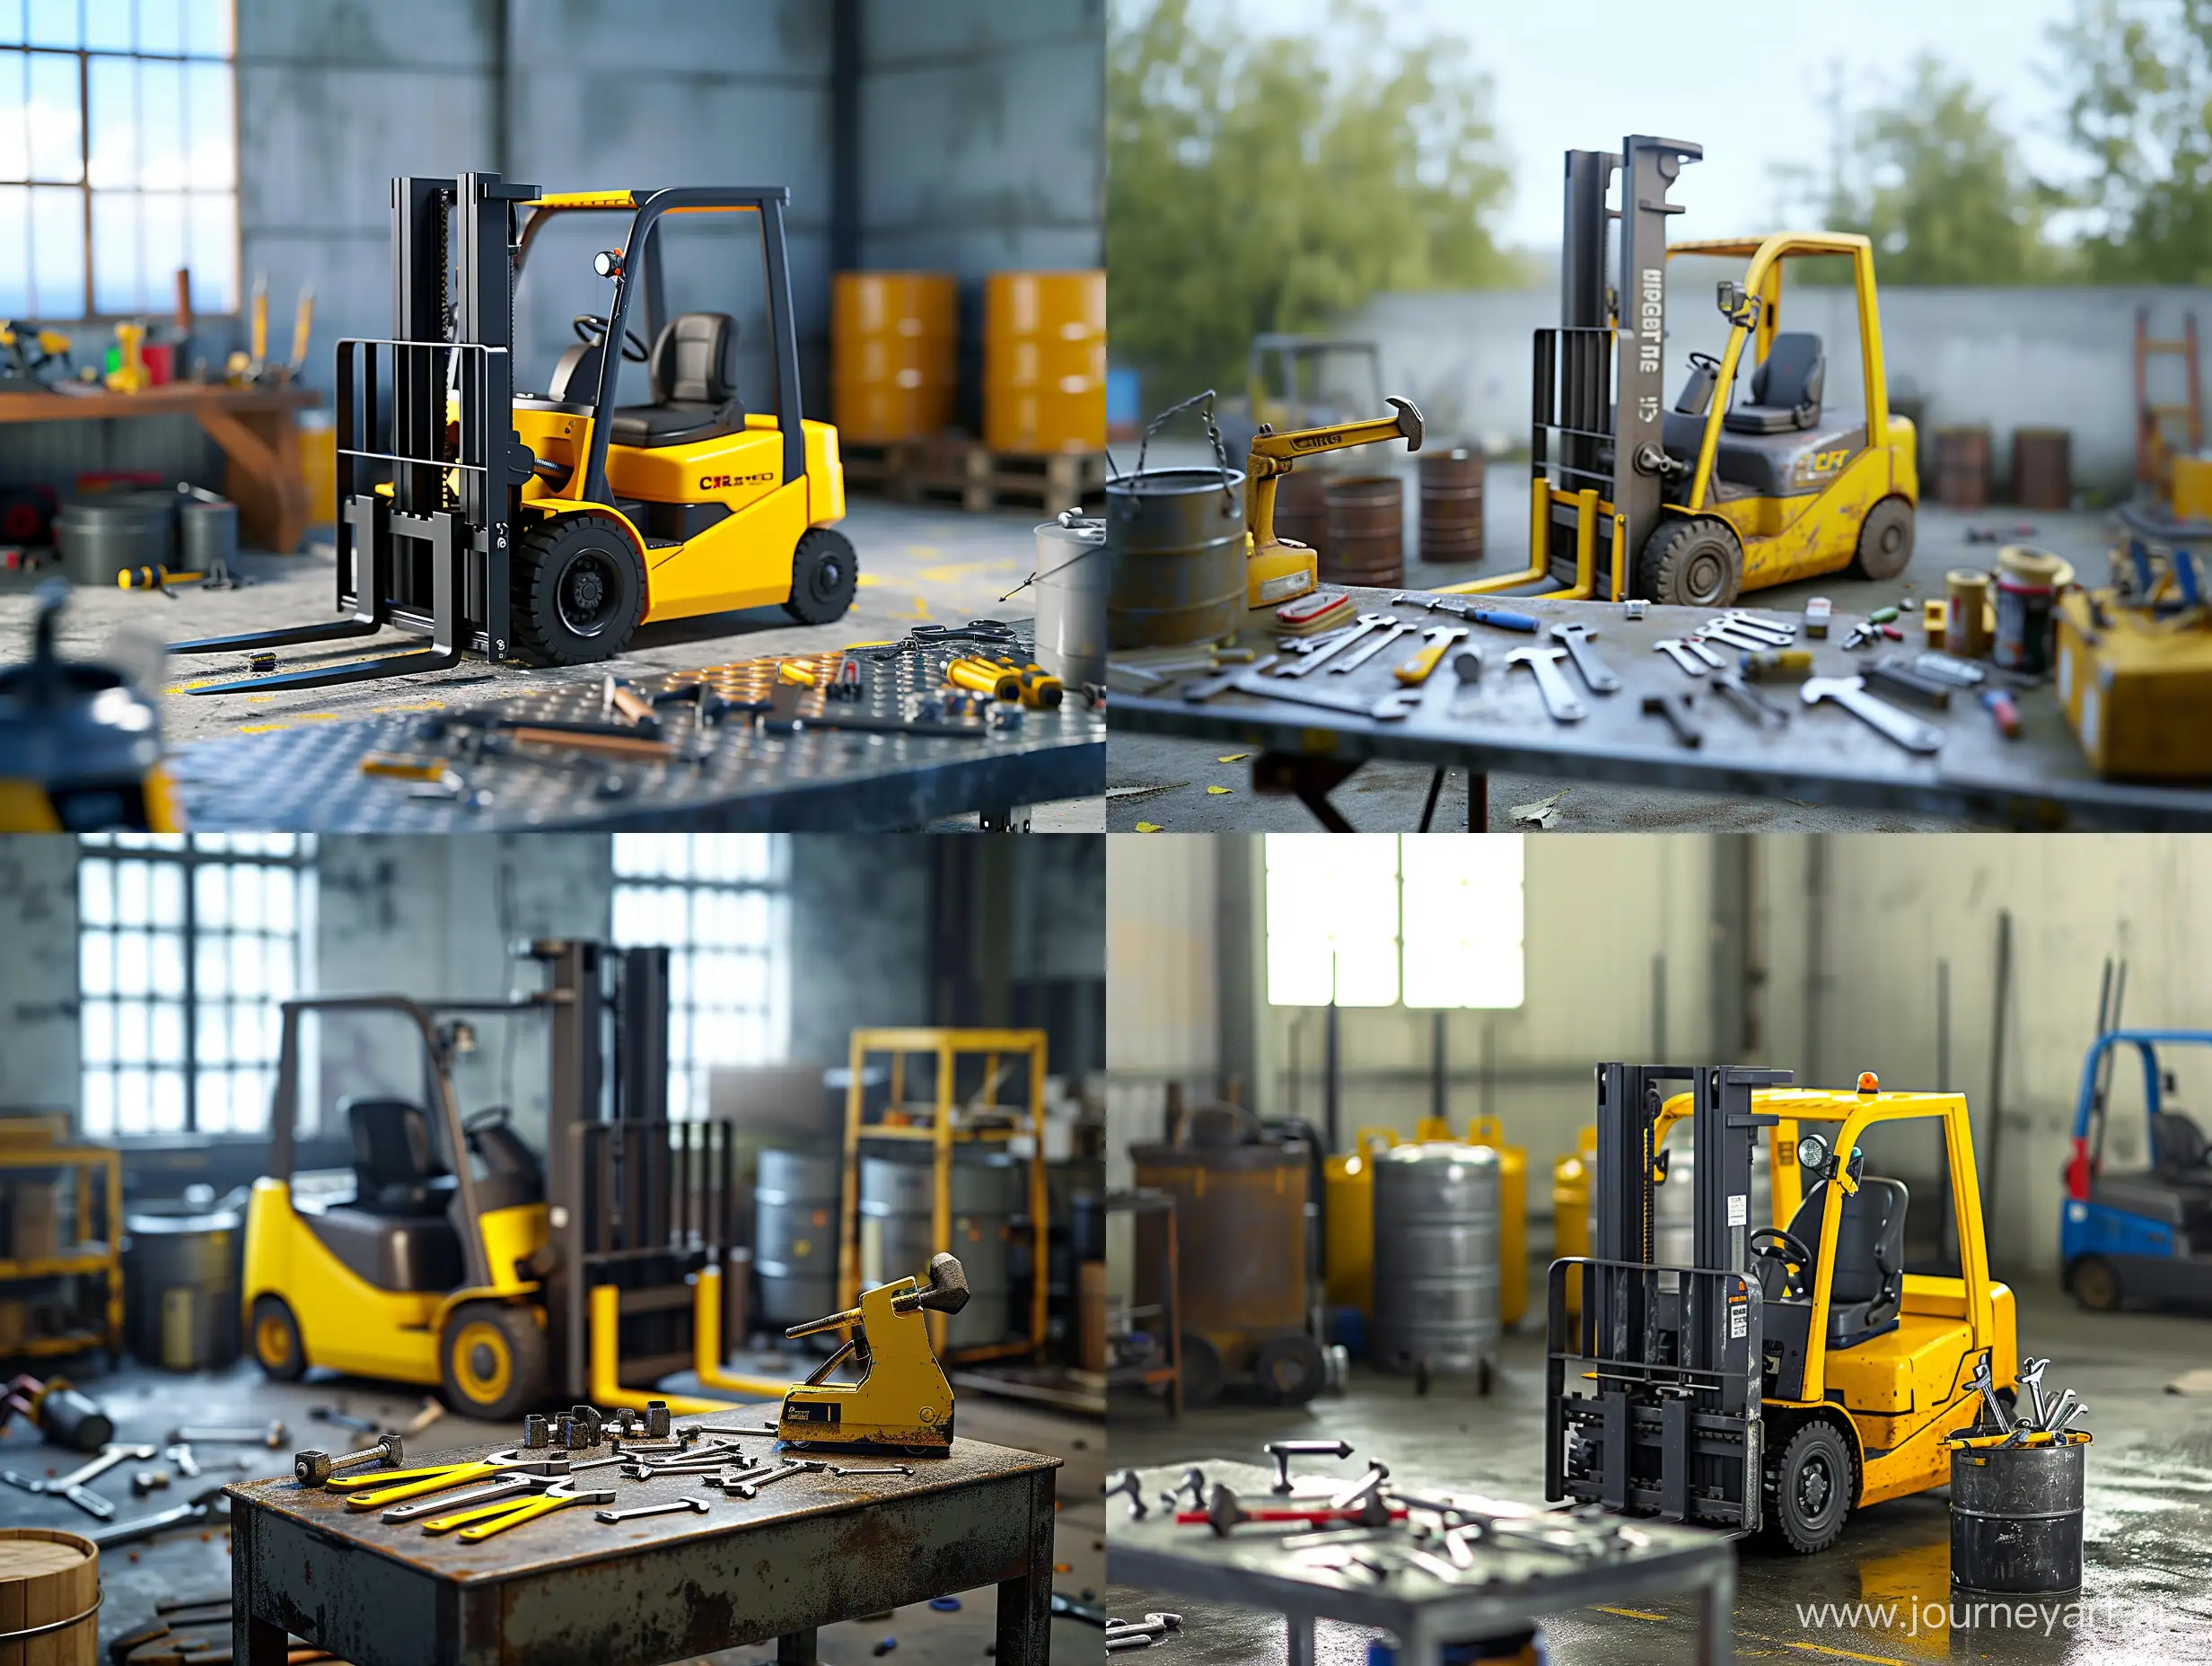 Professional-Forklift-Repair-Scene-with-Tool-Table-and-Barrels